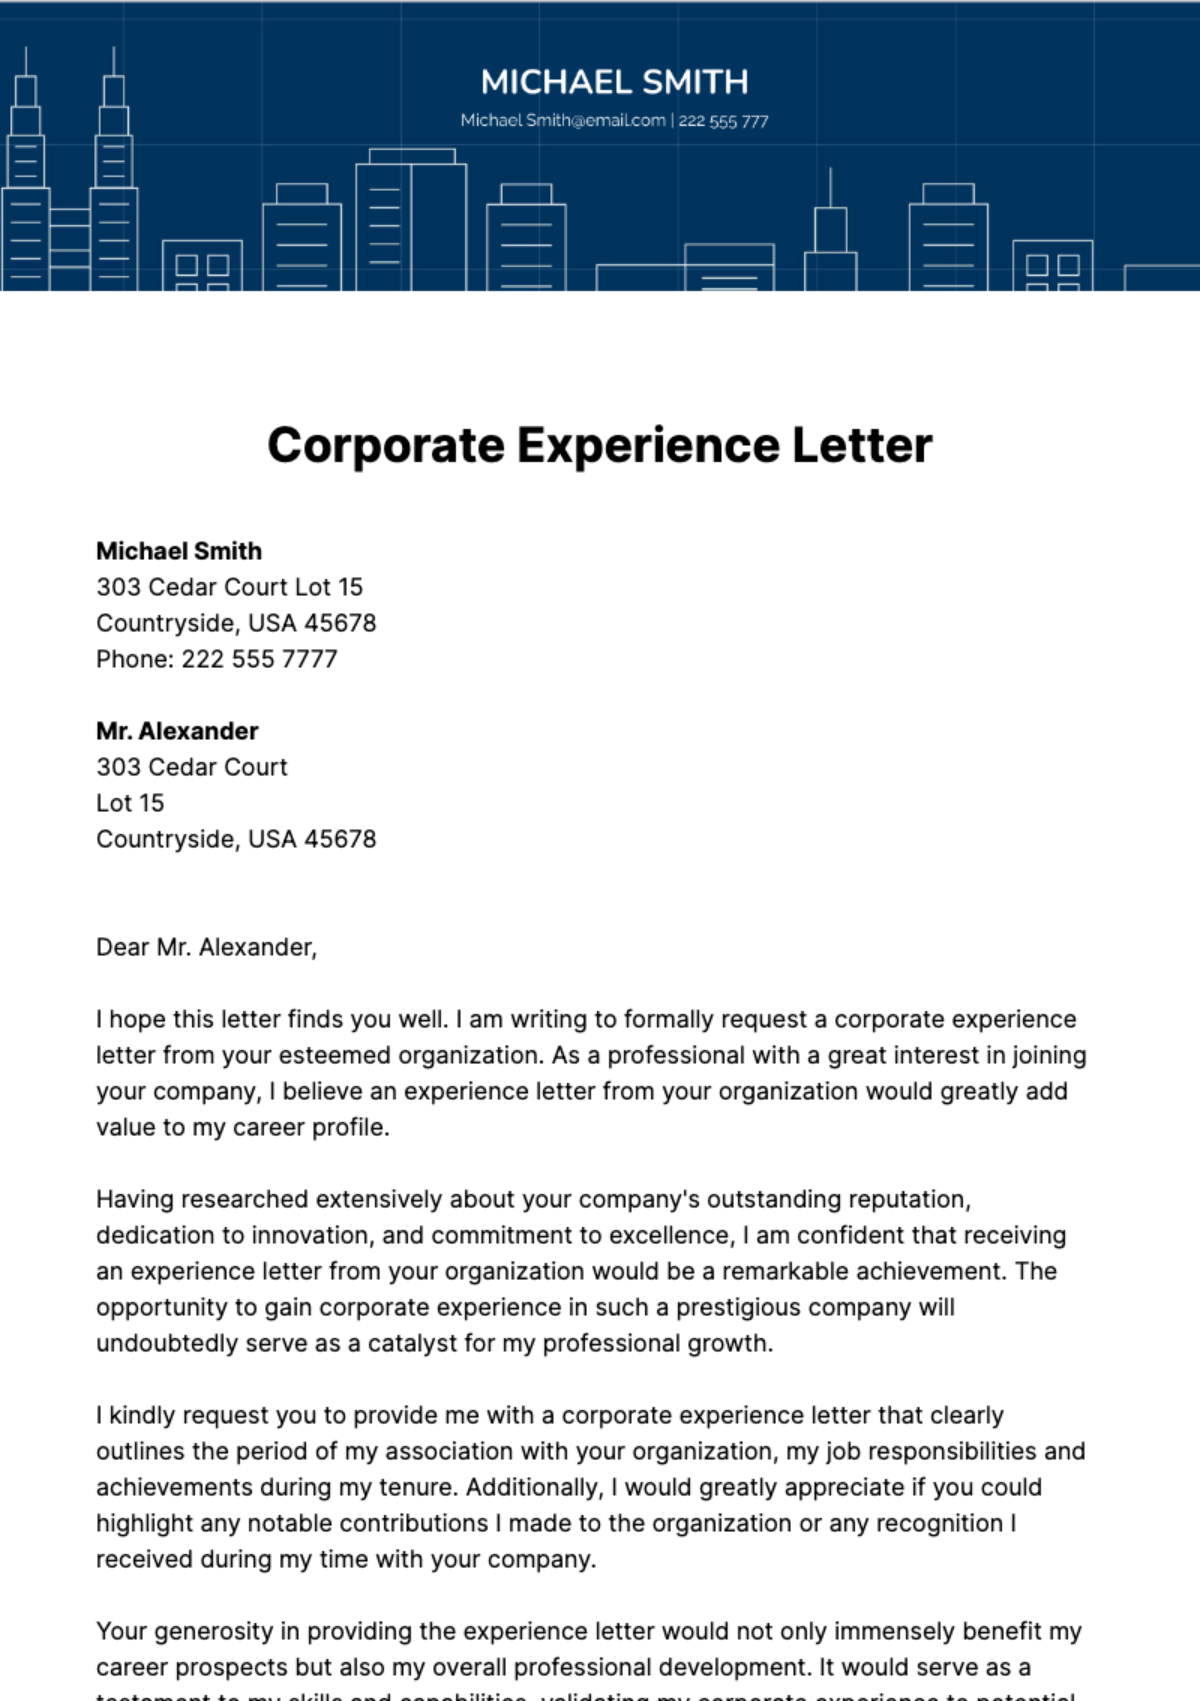 Corporate Experience Letter Template